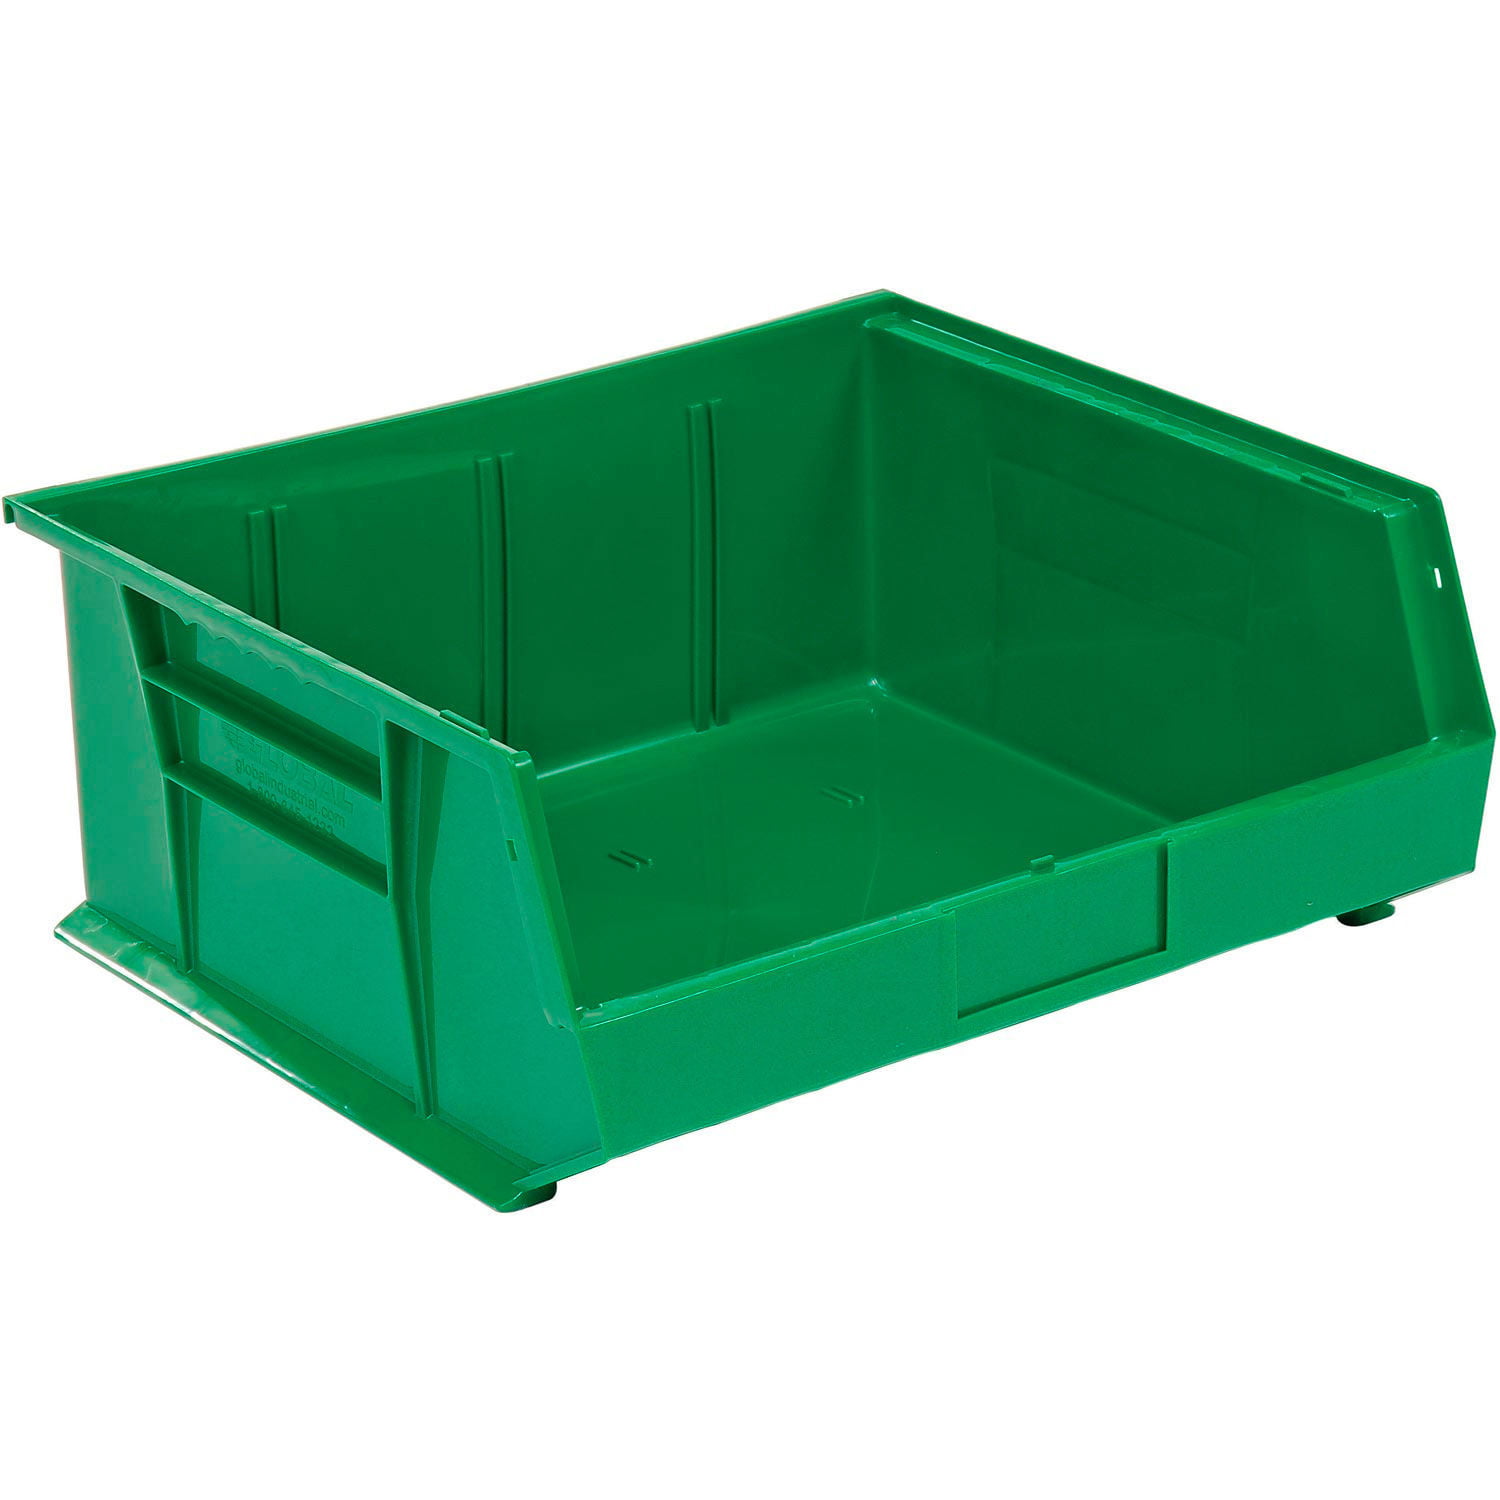 5 Green Essentials Collapsible Storage Containers Bins W Handle  11x10.5x10.5" 